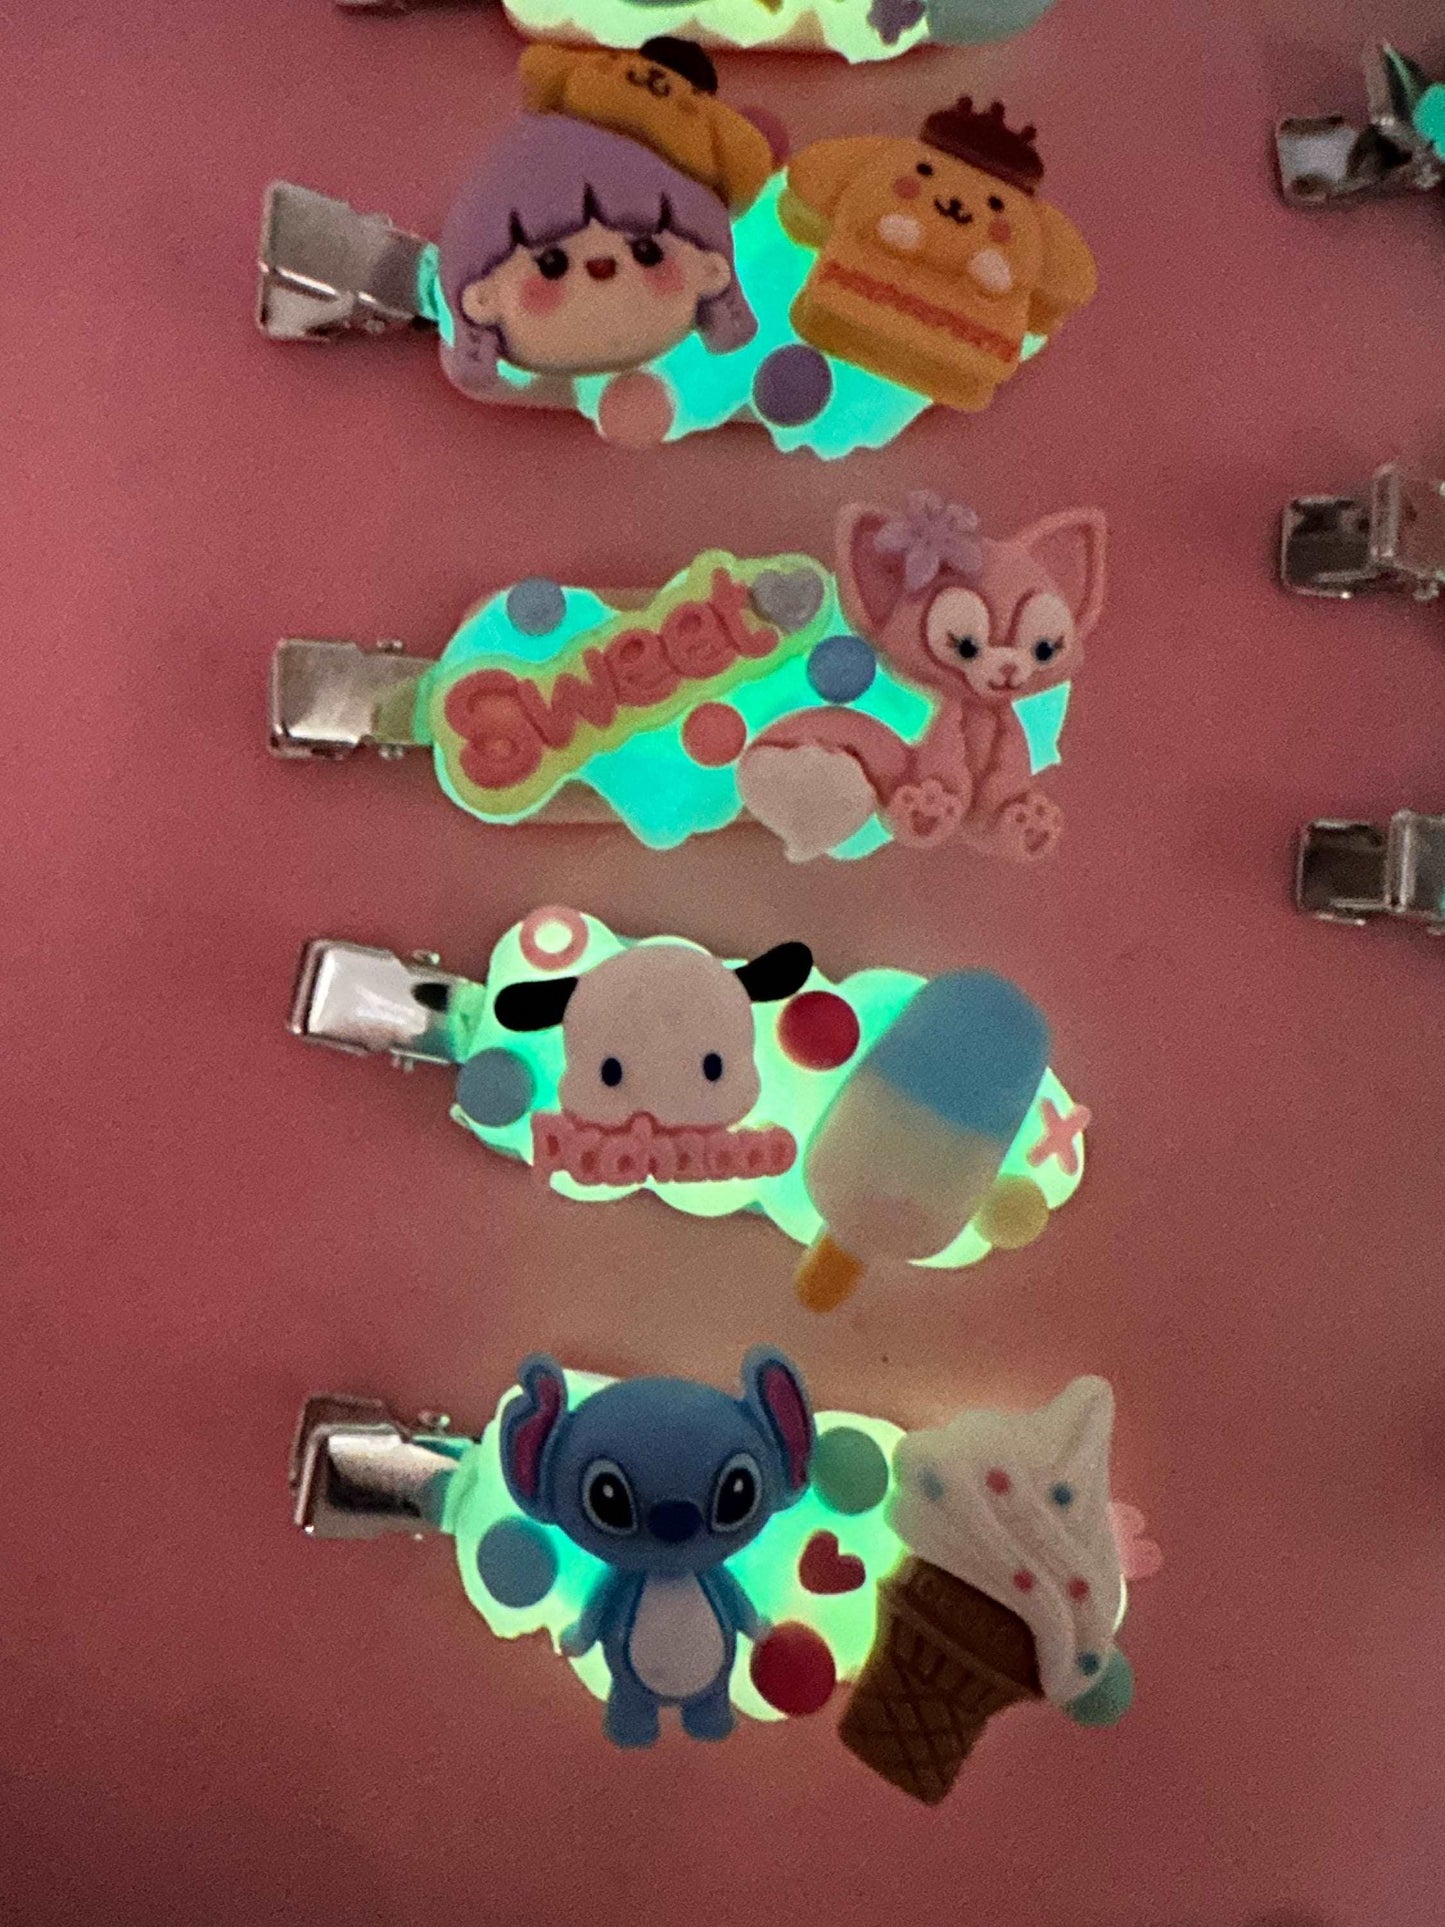 Hair clips, Kawaii style, cream glue, accessories, one-of-a-kind, glow in the dark